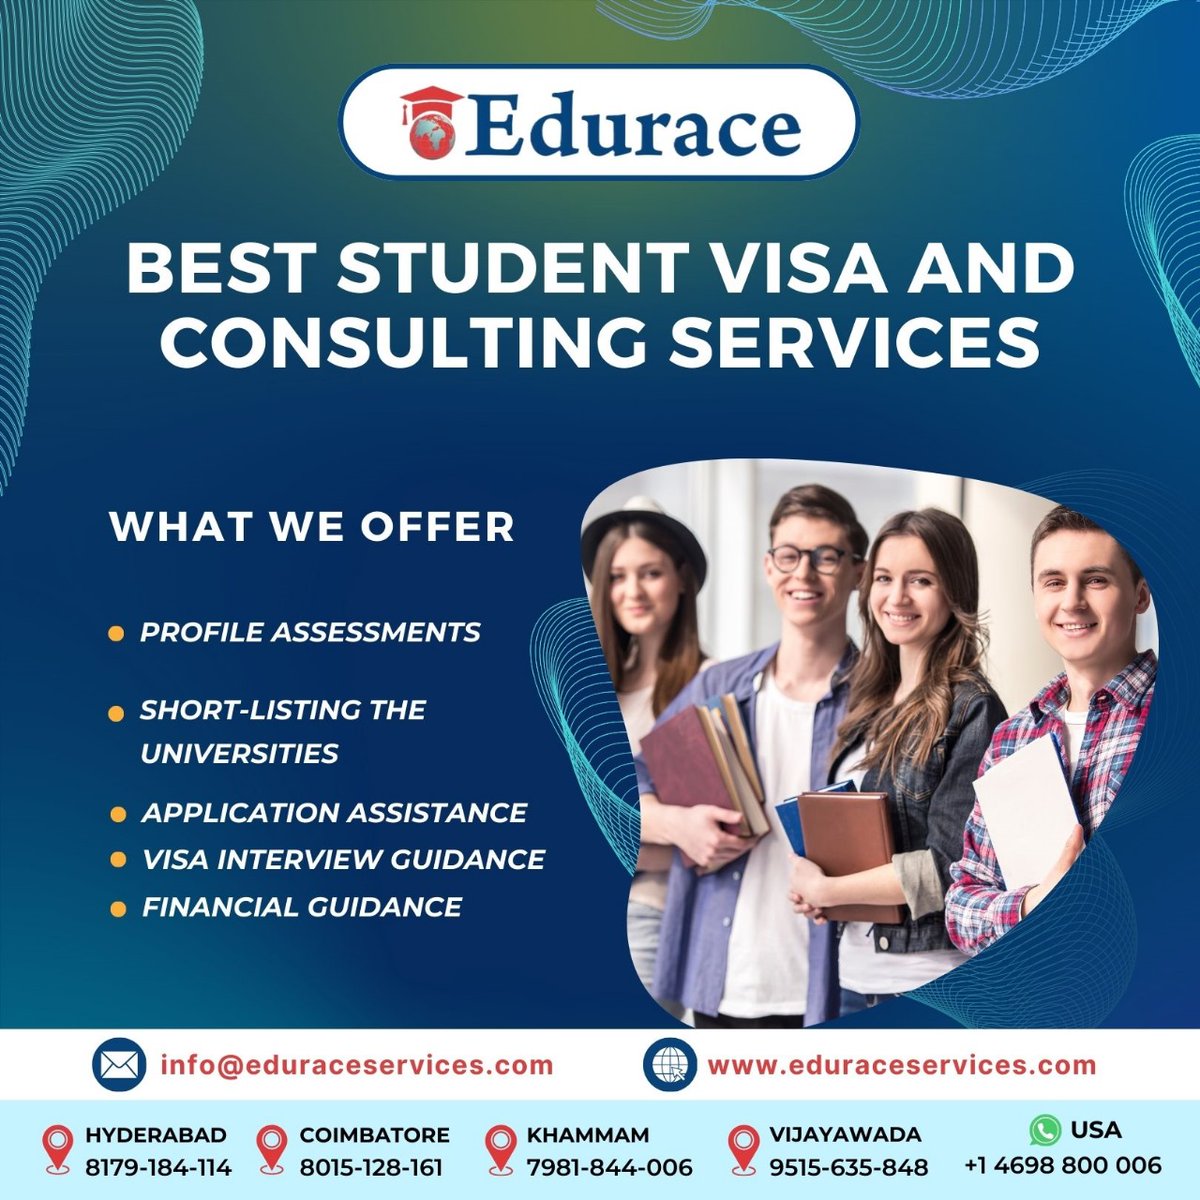 Unlock your academic dreams with our top-tier student visa and study abroad consulting services! 🌍🎓 Let us guide you towards your bright future!

#studyabroad #studyabroadtips #study #overseaseducation #overseaseducationconsultant #topcolleges #eduraceservices